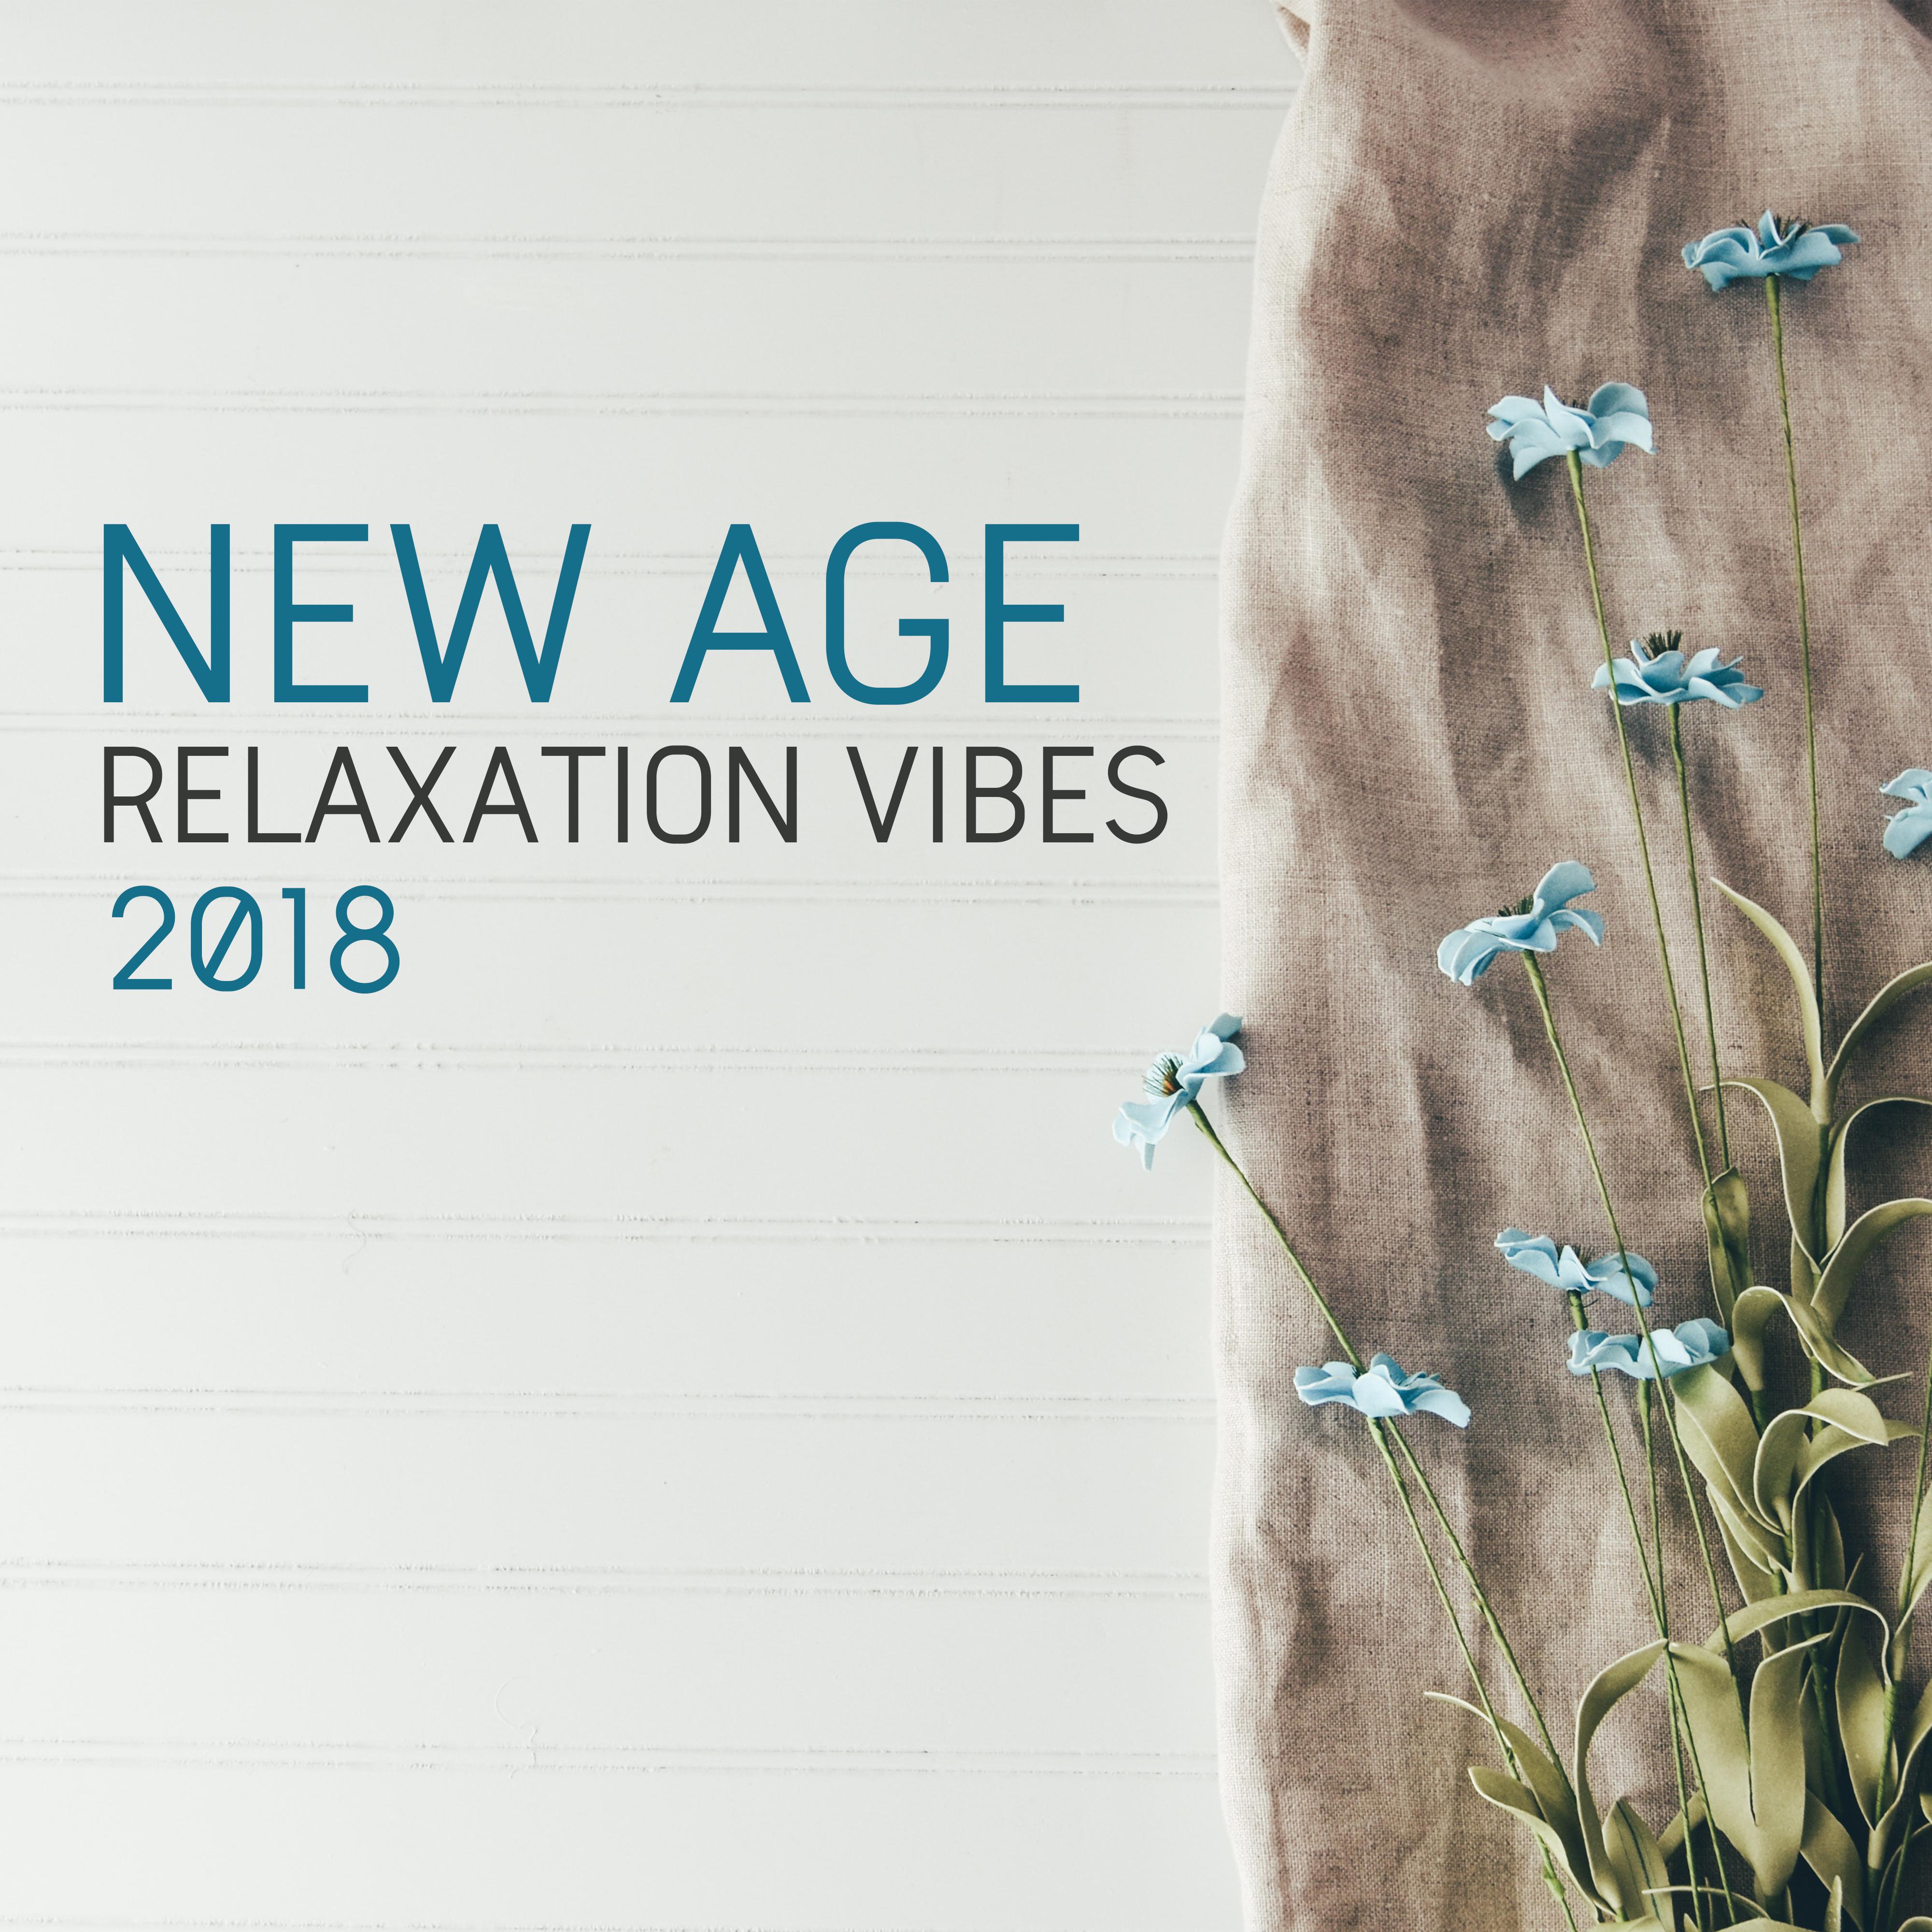 New Age Relaxation Vibes 2018